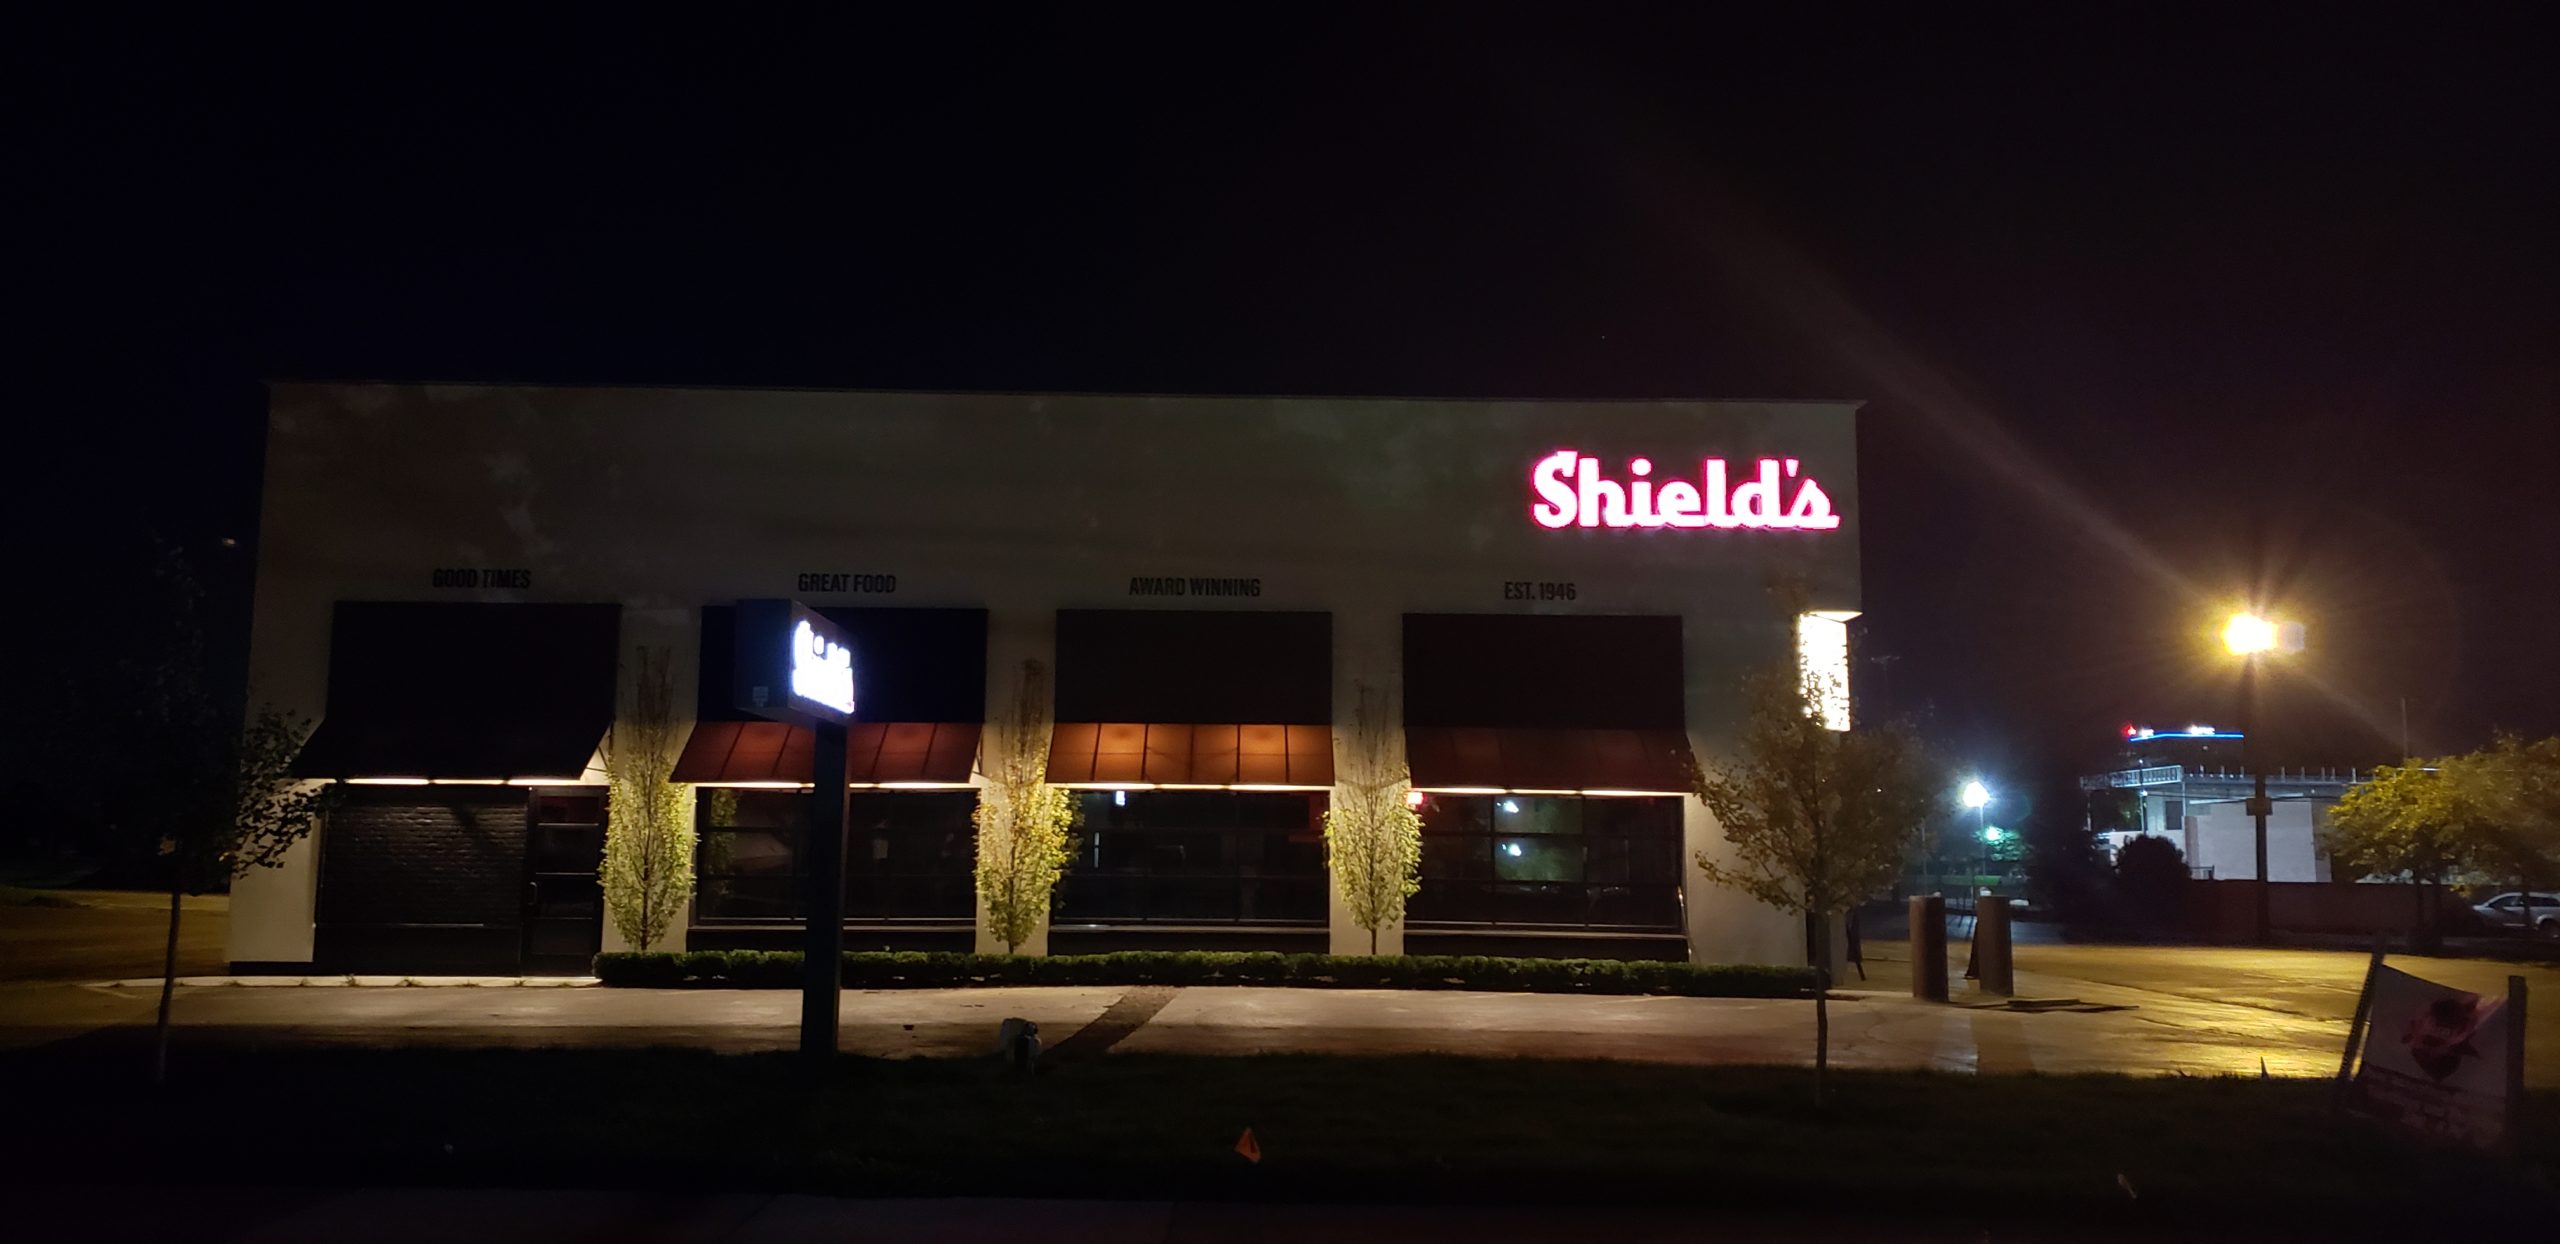 Shield's channel letter illuminated building sign in red